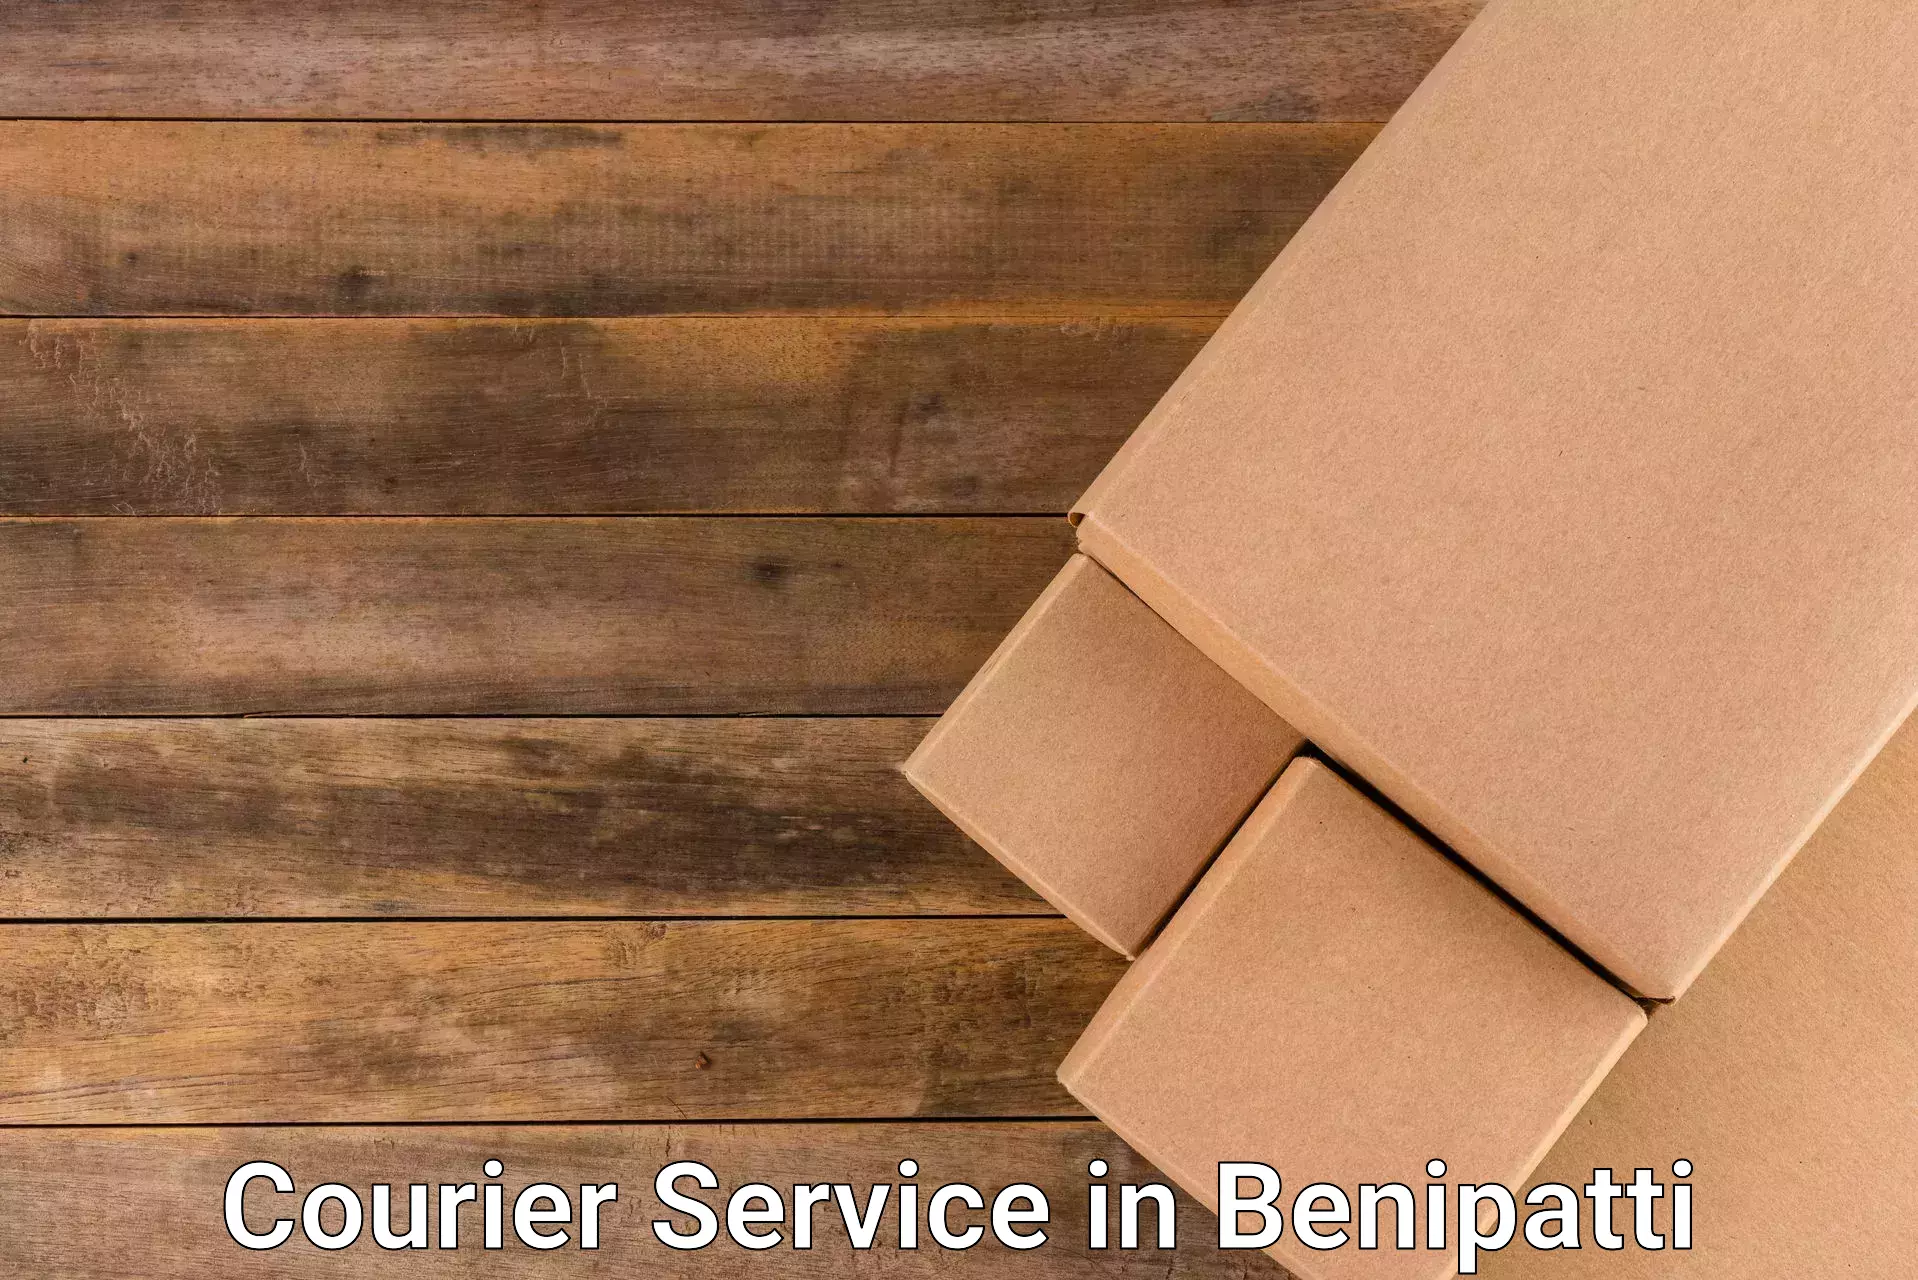 Quality courier services in Benipatti